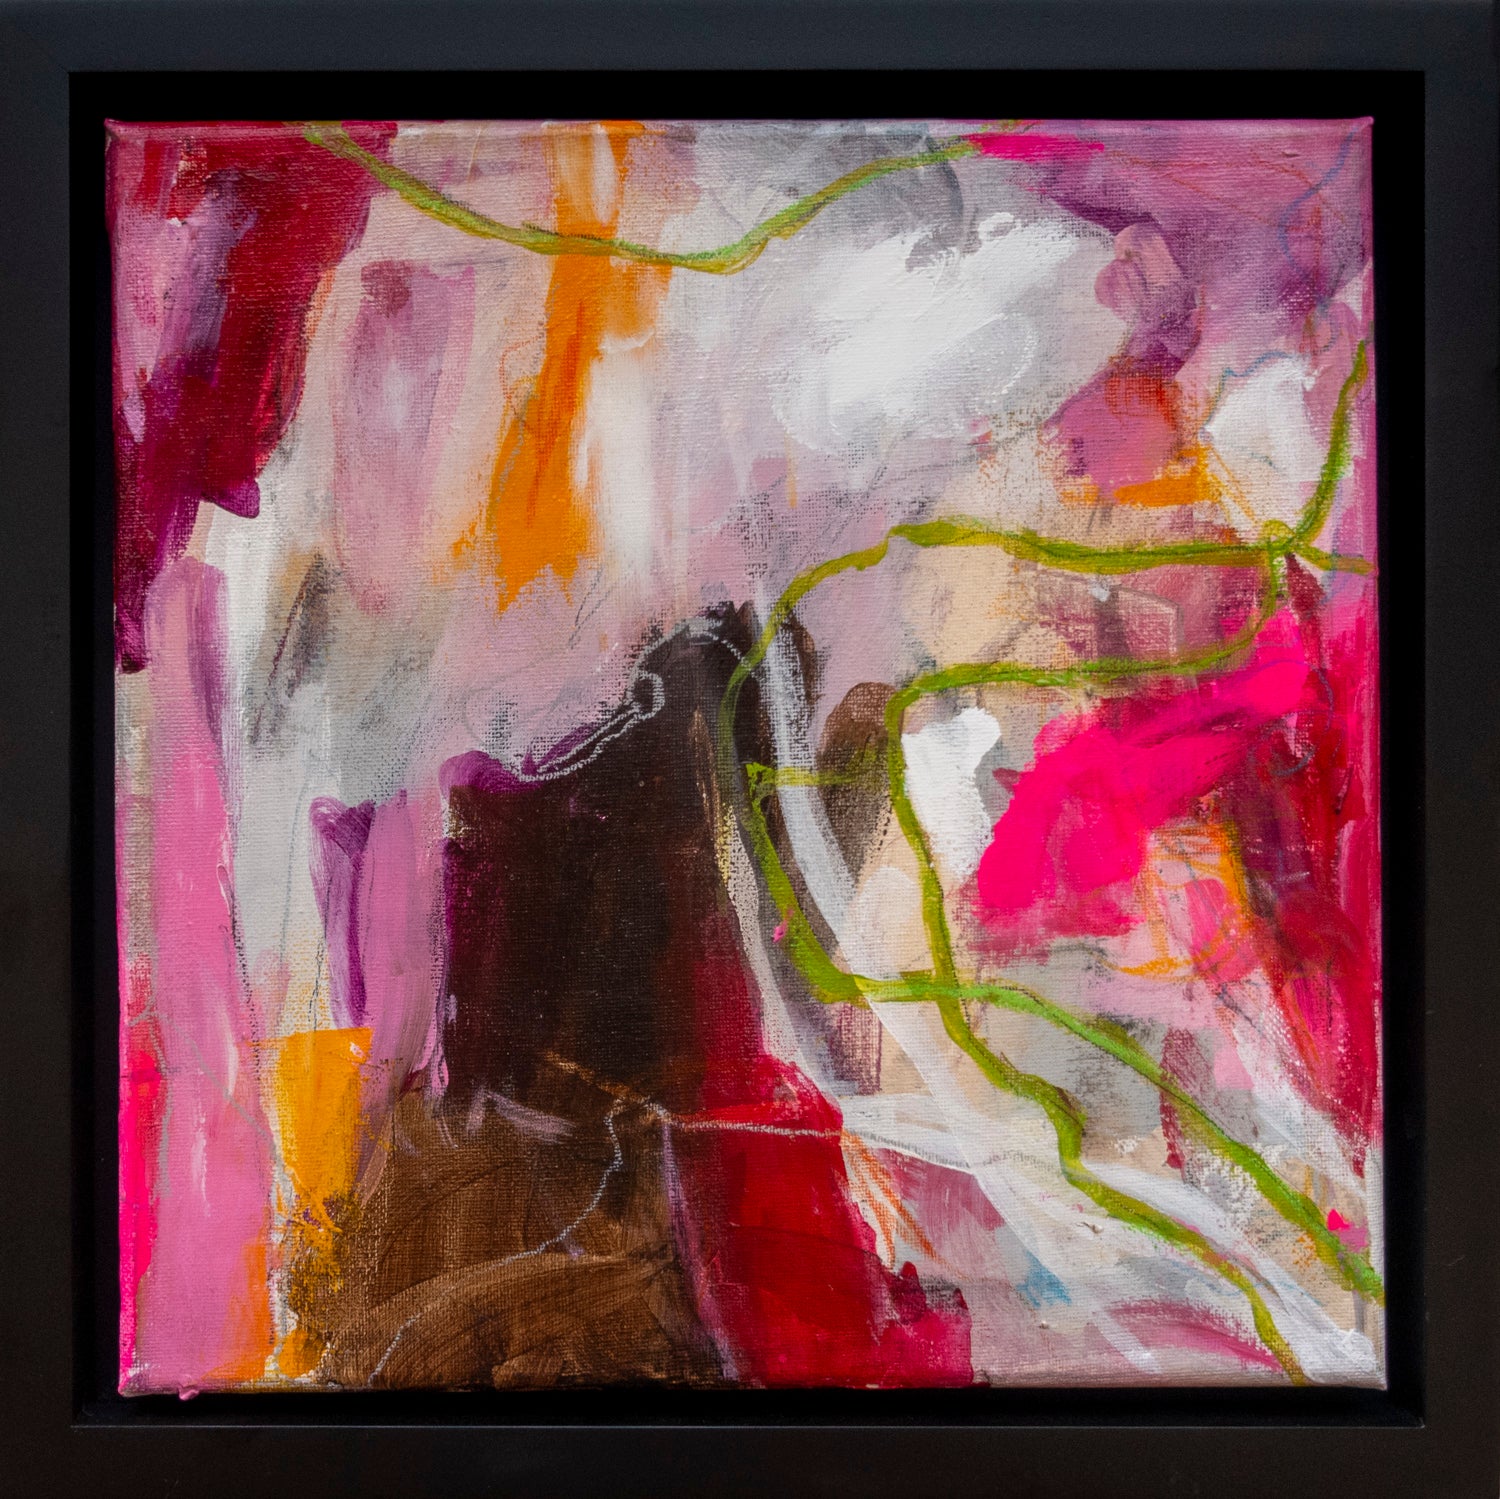 Colorful abstract painting using acrylic paint titled 'Hera' by artist Steffi Möllers; canvas measures 12"x12"; with black wood frame measures 13"x13"